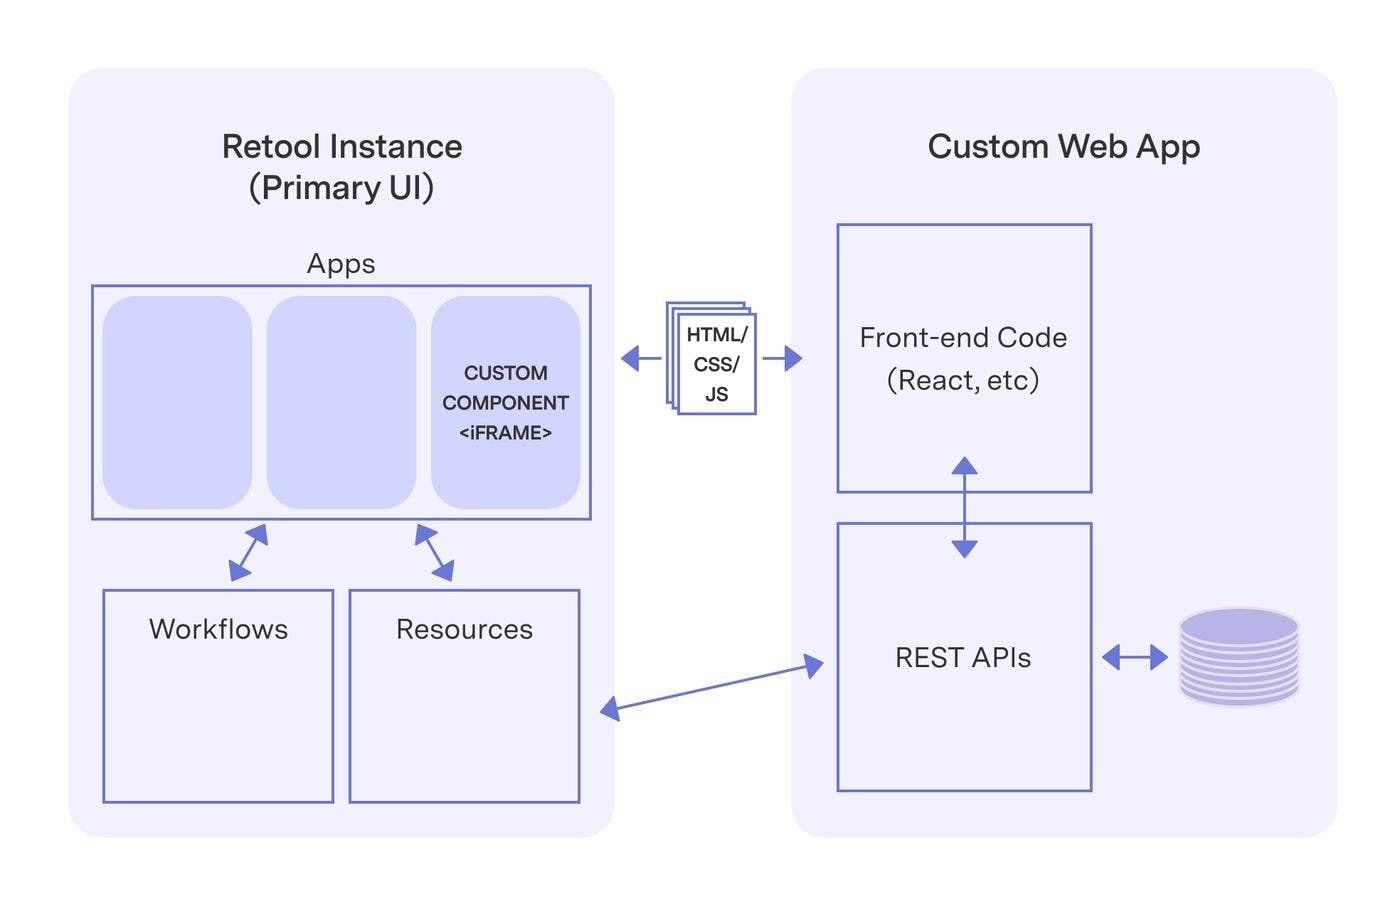 A hybrid architecture with Retool "on top" of a custom web application